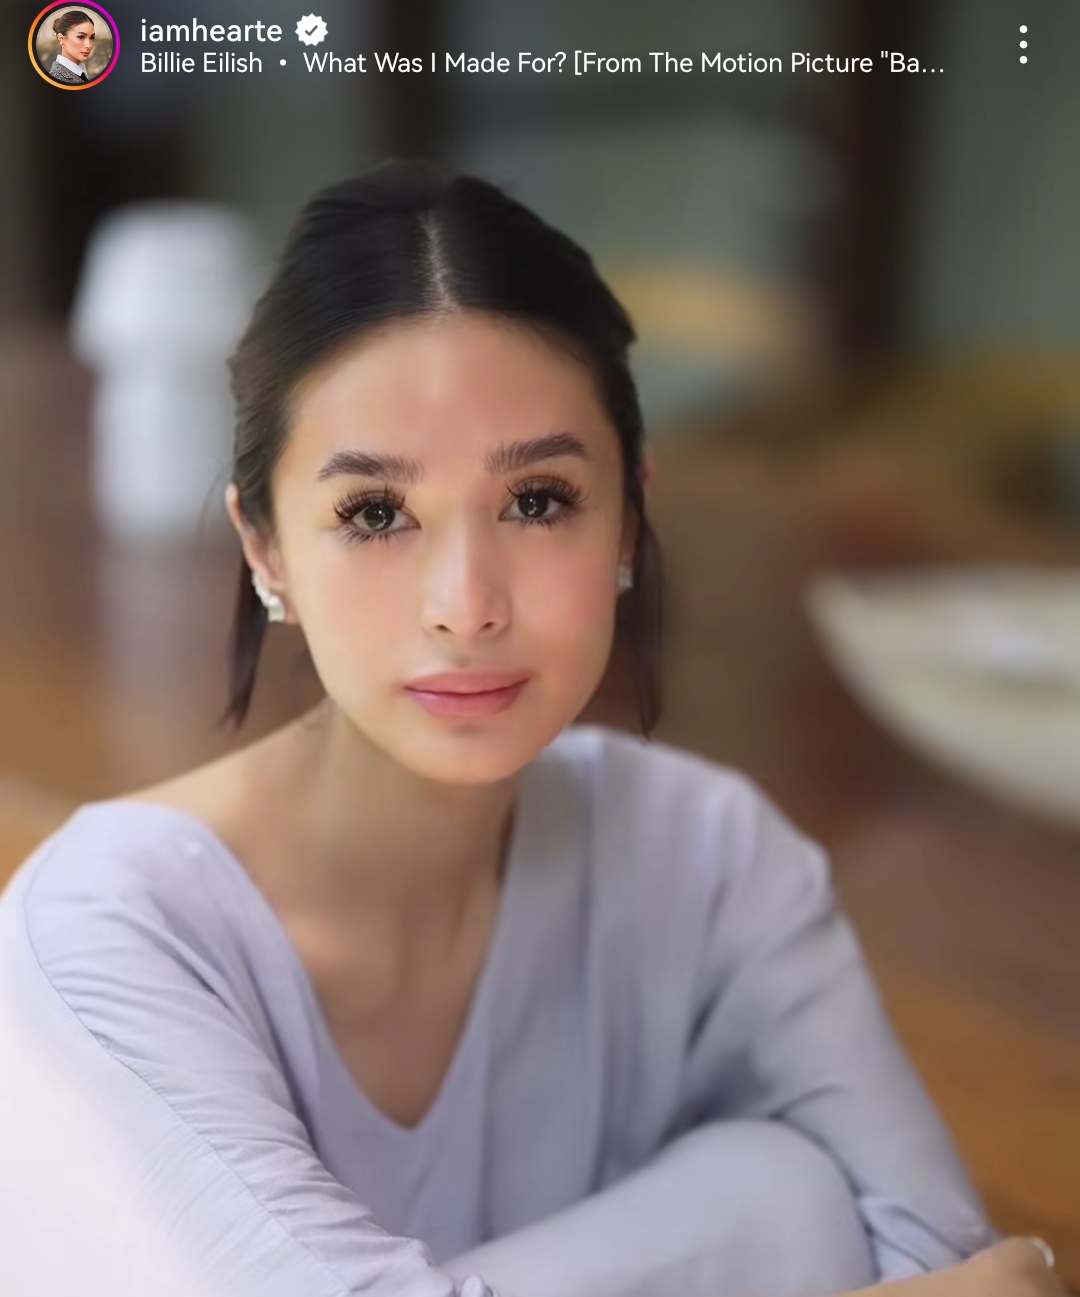 Heart Evangelista on Instagram: Feel good in what you wear and